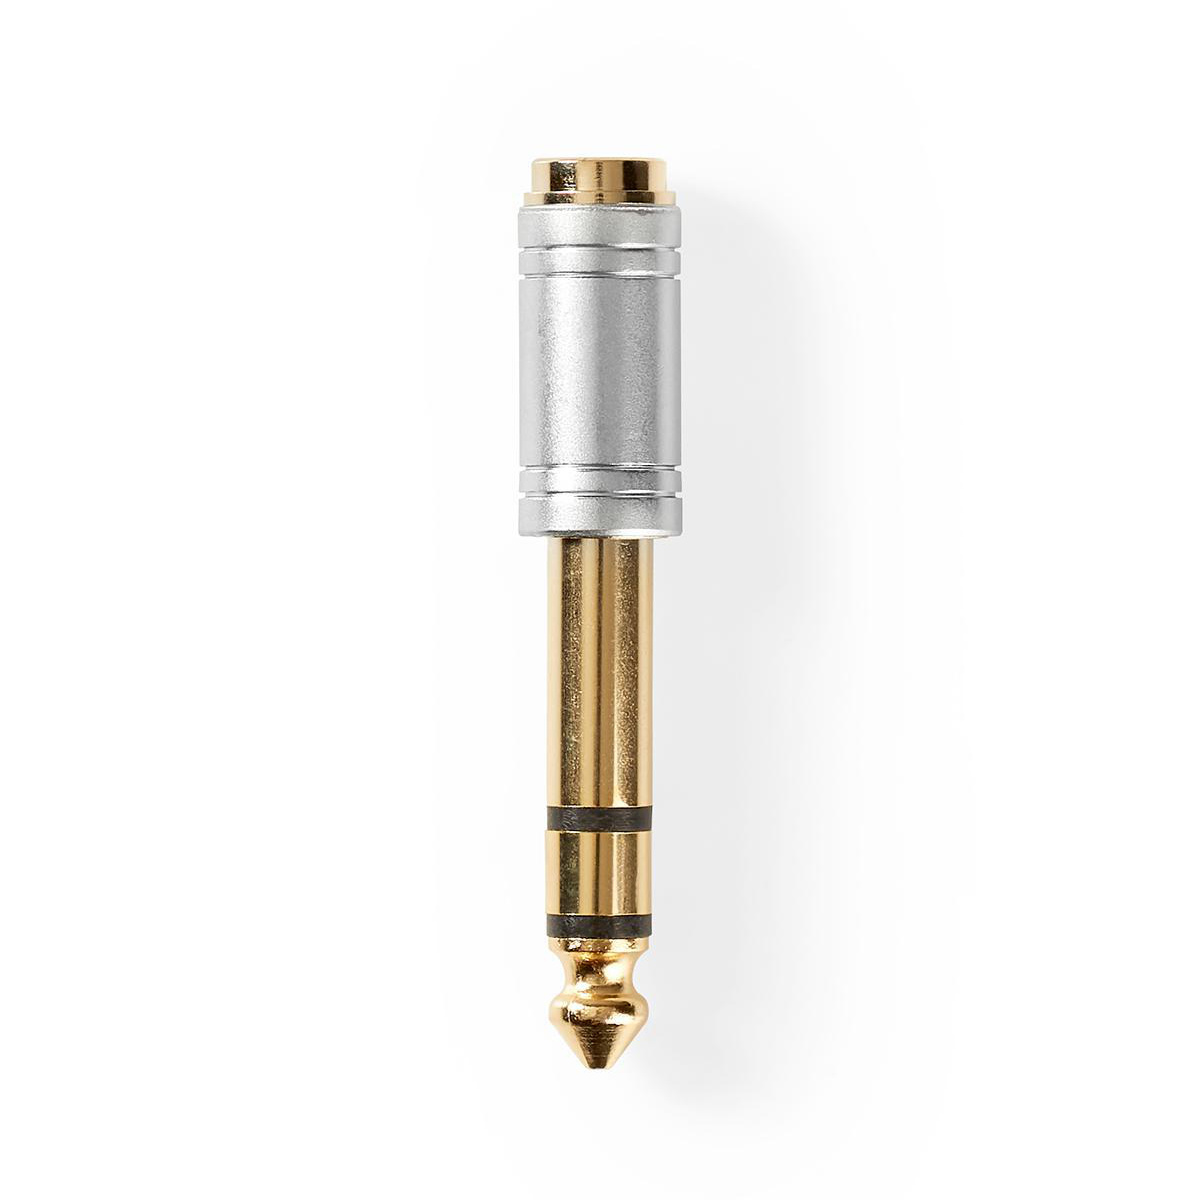 Stereo gold plated audio adapter for headphone